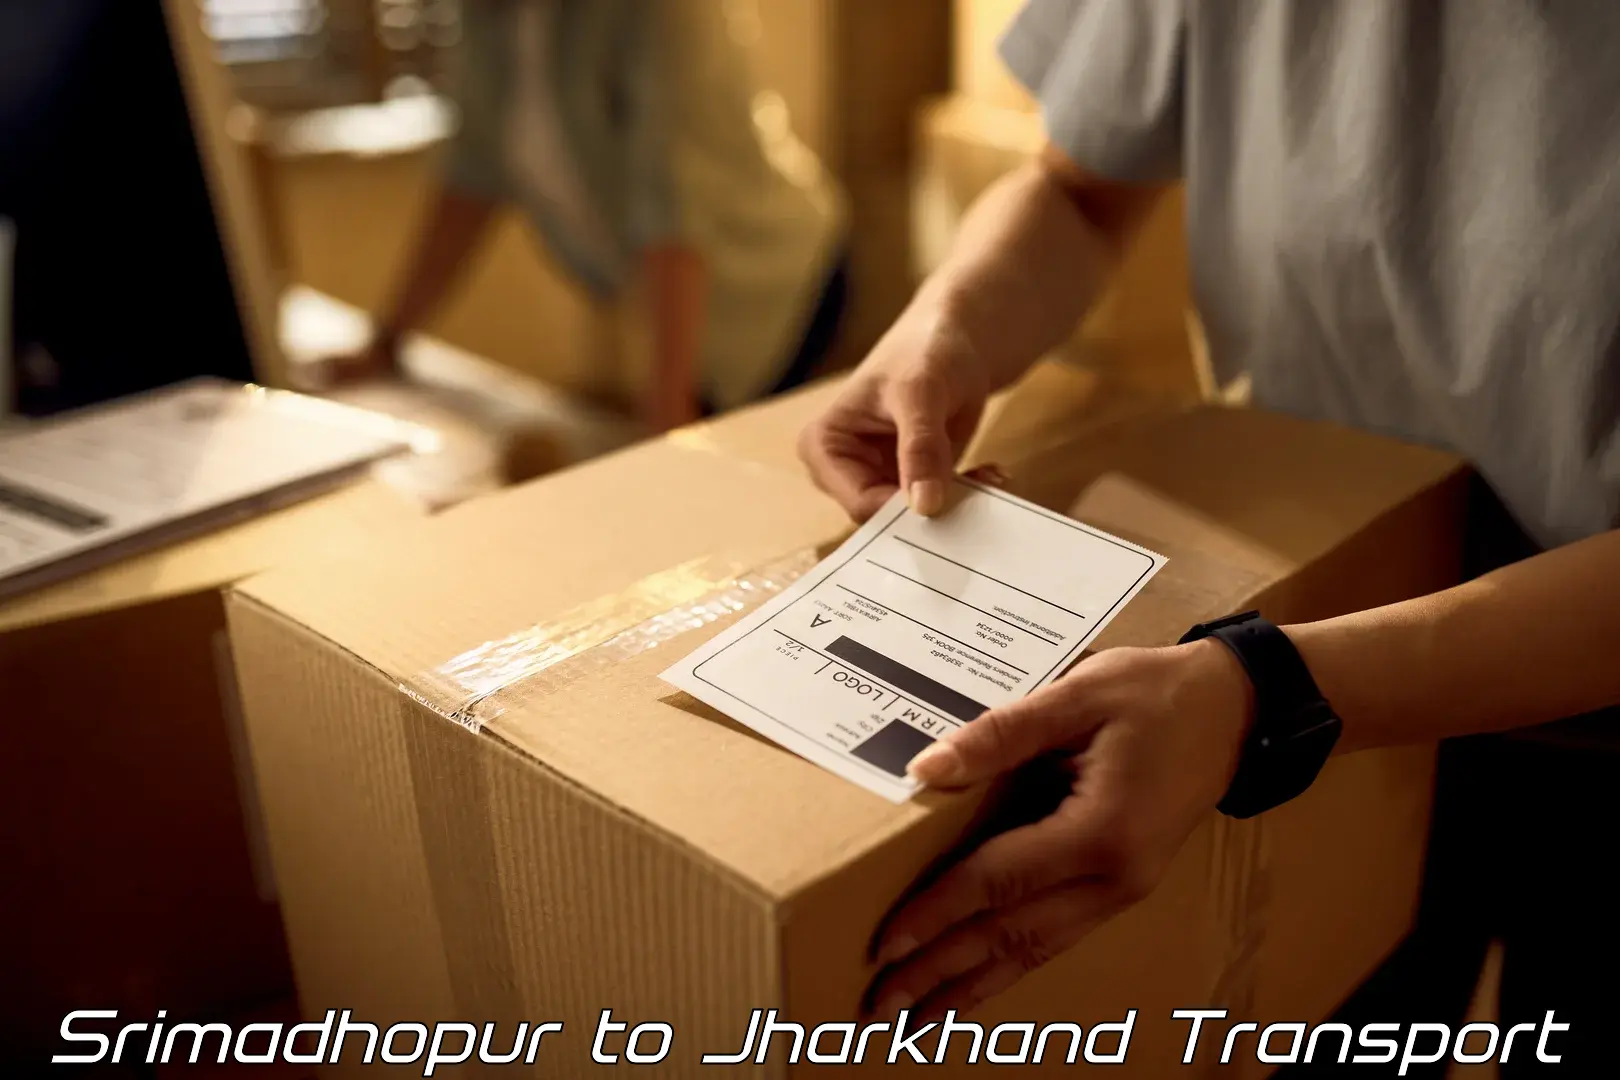 Transport in sharing Srimadhopur to Jharkhand